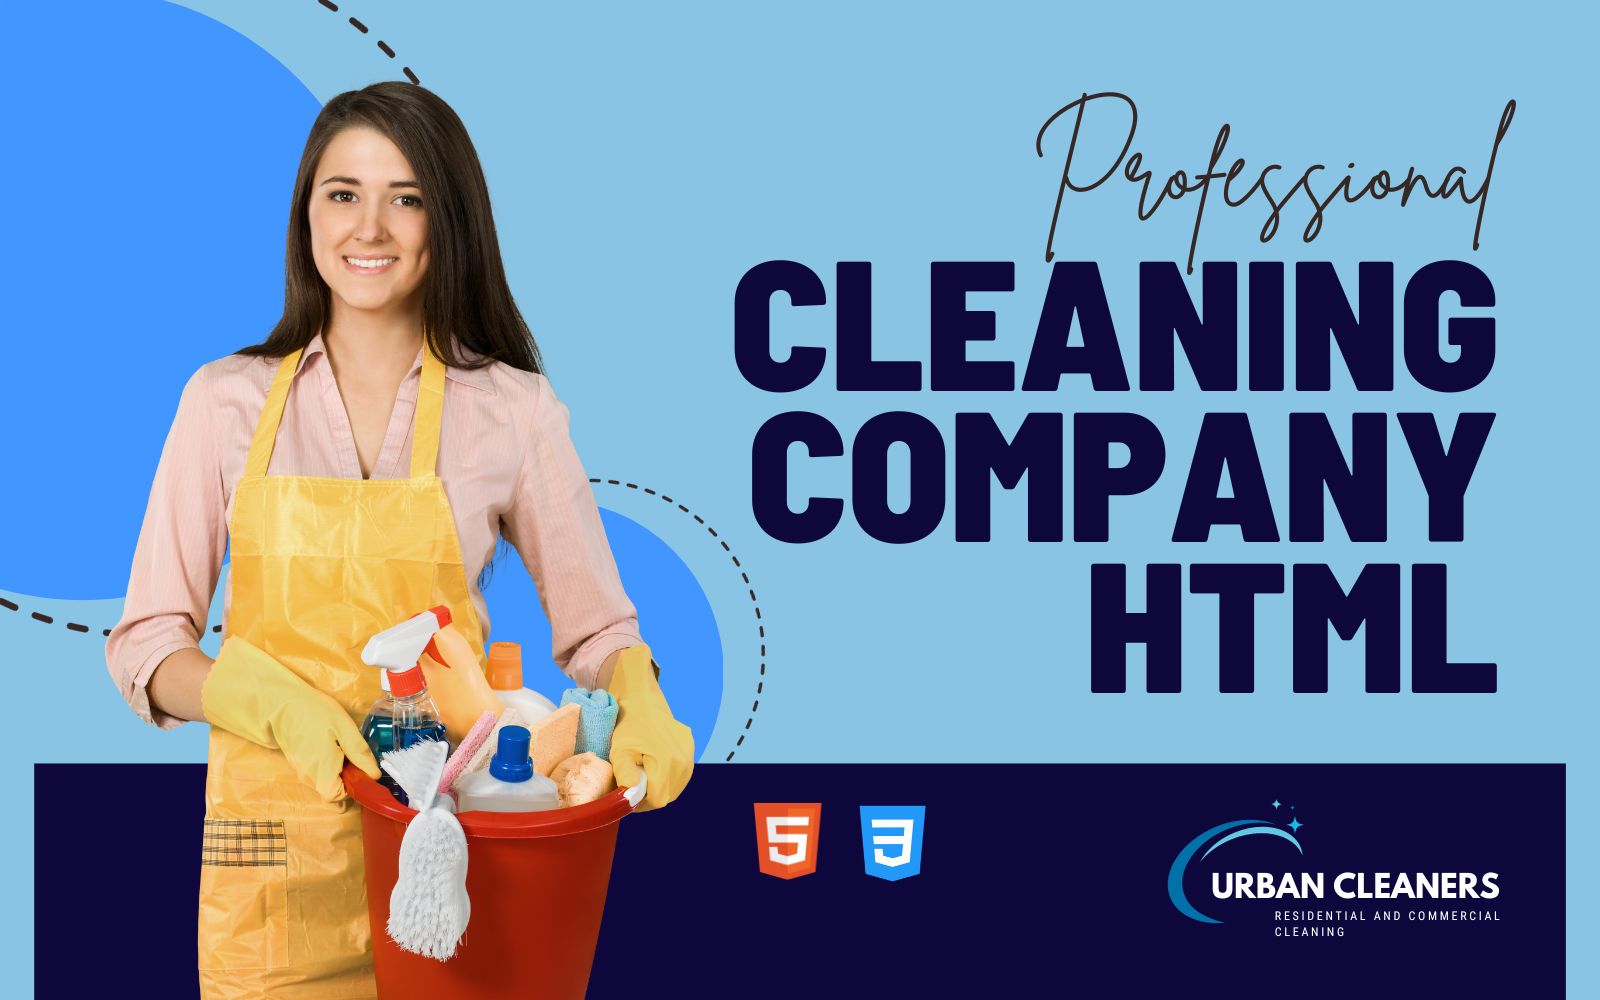 UrbanCleaners - Cleaning Company HTML5 Template